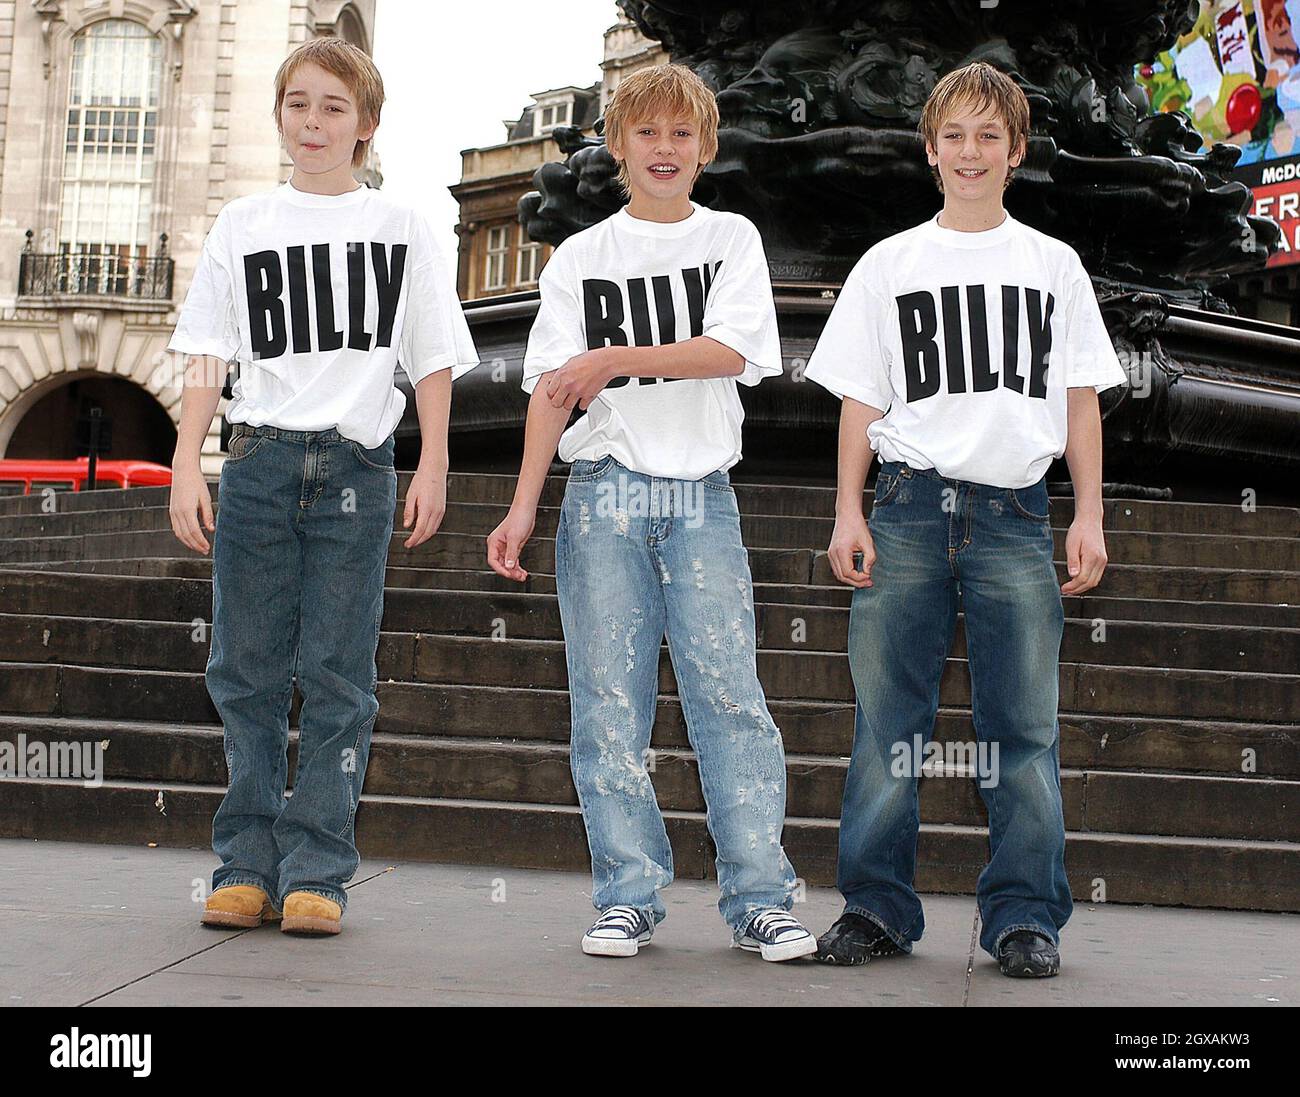 Stephen Daldry, director and writer Lee Hall, introduce the three young actors, picked from over 3000 hopefuls to play title role in the musical of Billy Elliott.  The boys from the left are Liam Mower, 12 years old, George Maguire, 13 years old and James Lomas, 14 years old.   Stock Photo